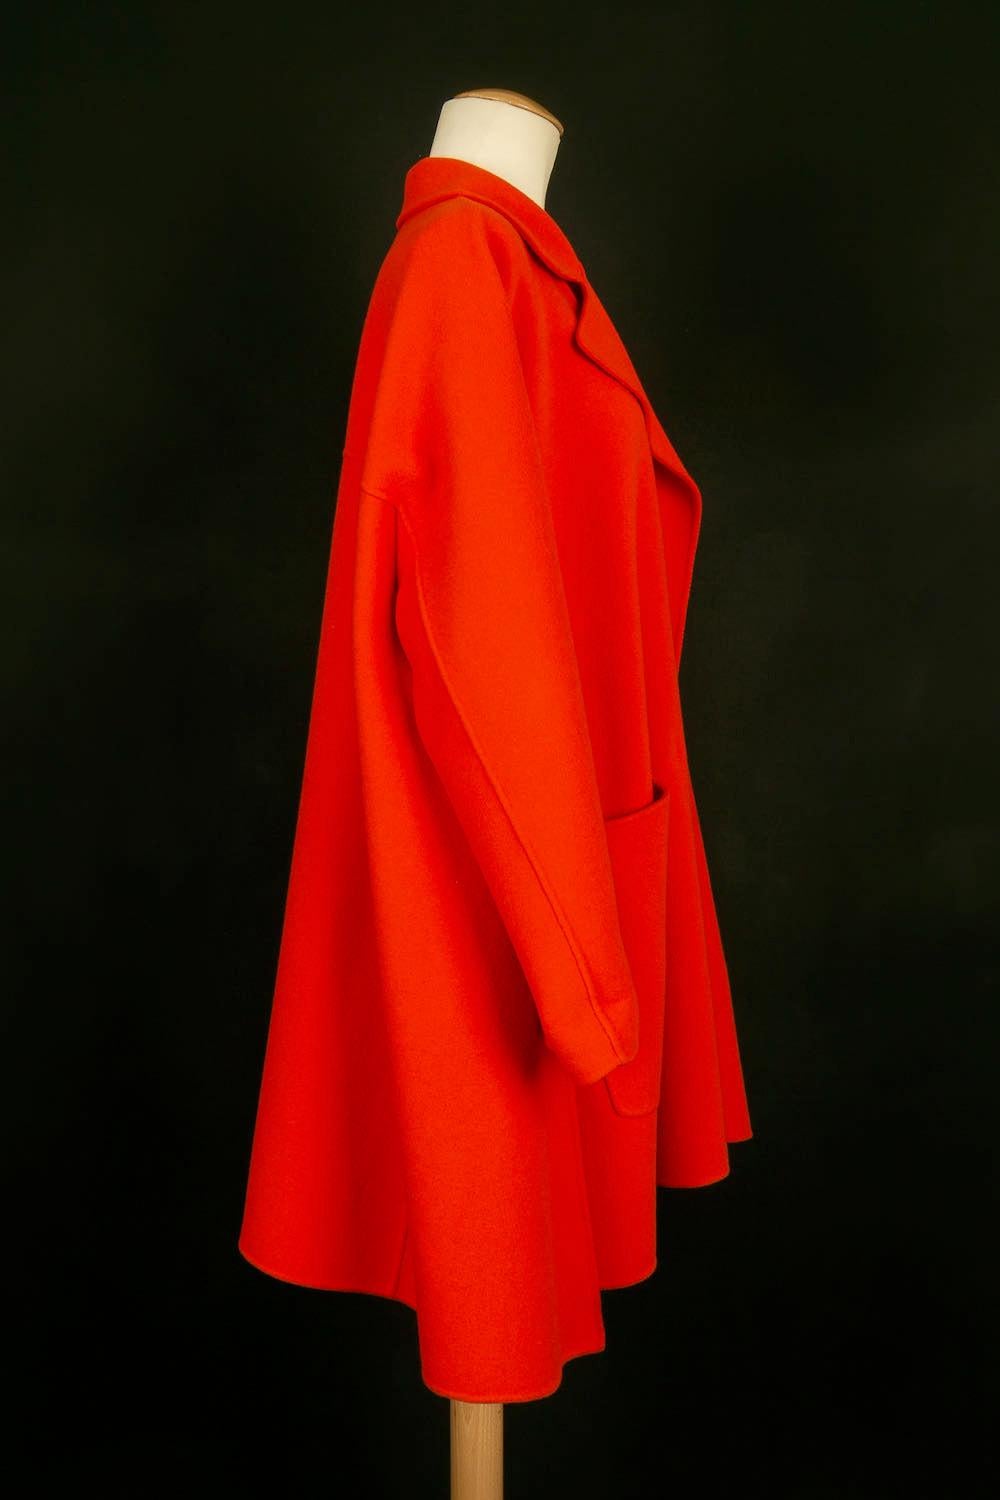 Dior -(Made in Italy) Orange cashmere coat. Size 40FR. Winter 2006 collection.

Additional information: 
Dimensions: Shoulder width: 55 cm, Chest: 71 cm, Sleeve length: 59 cm, Length: 93 cm
Condition: Very good condition
Seller Ref number: M10